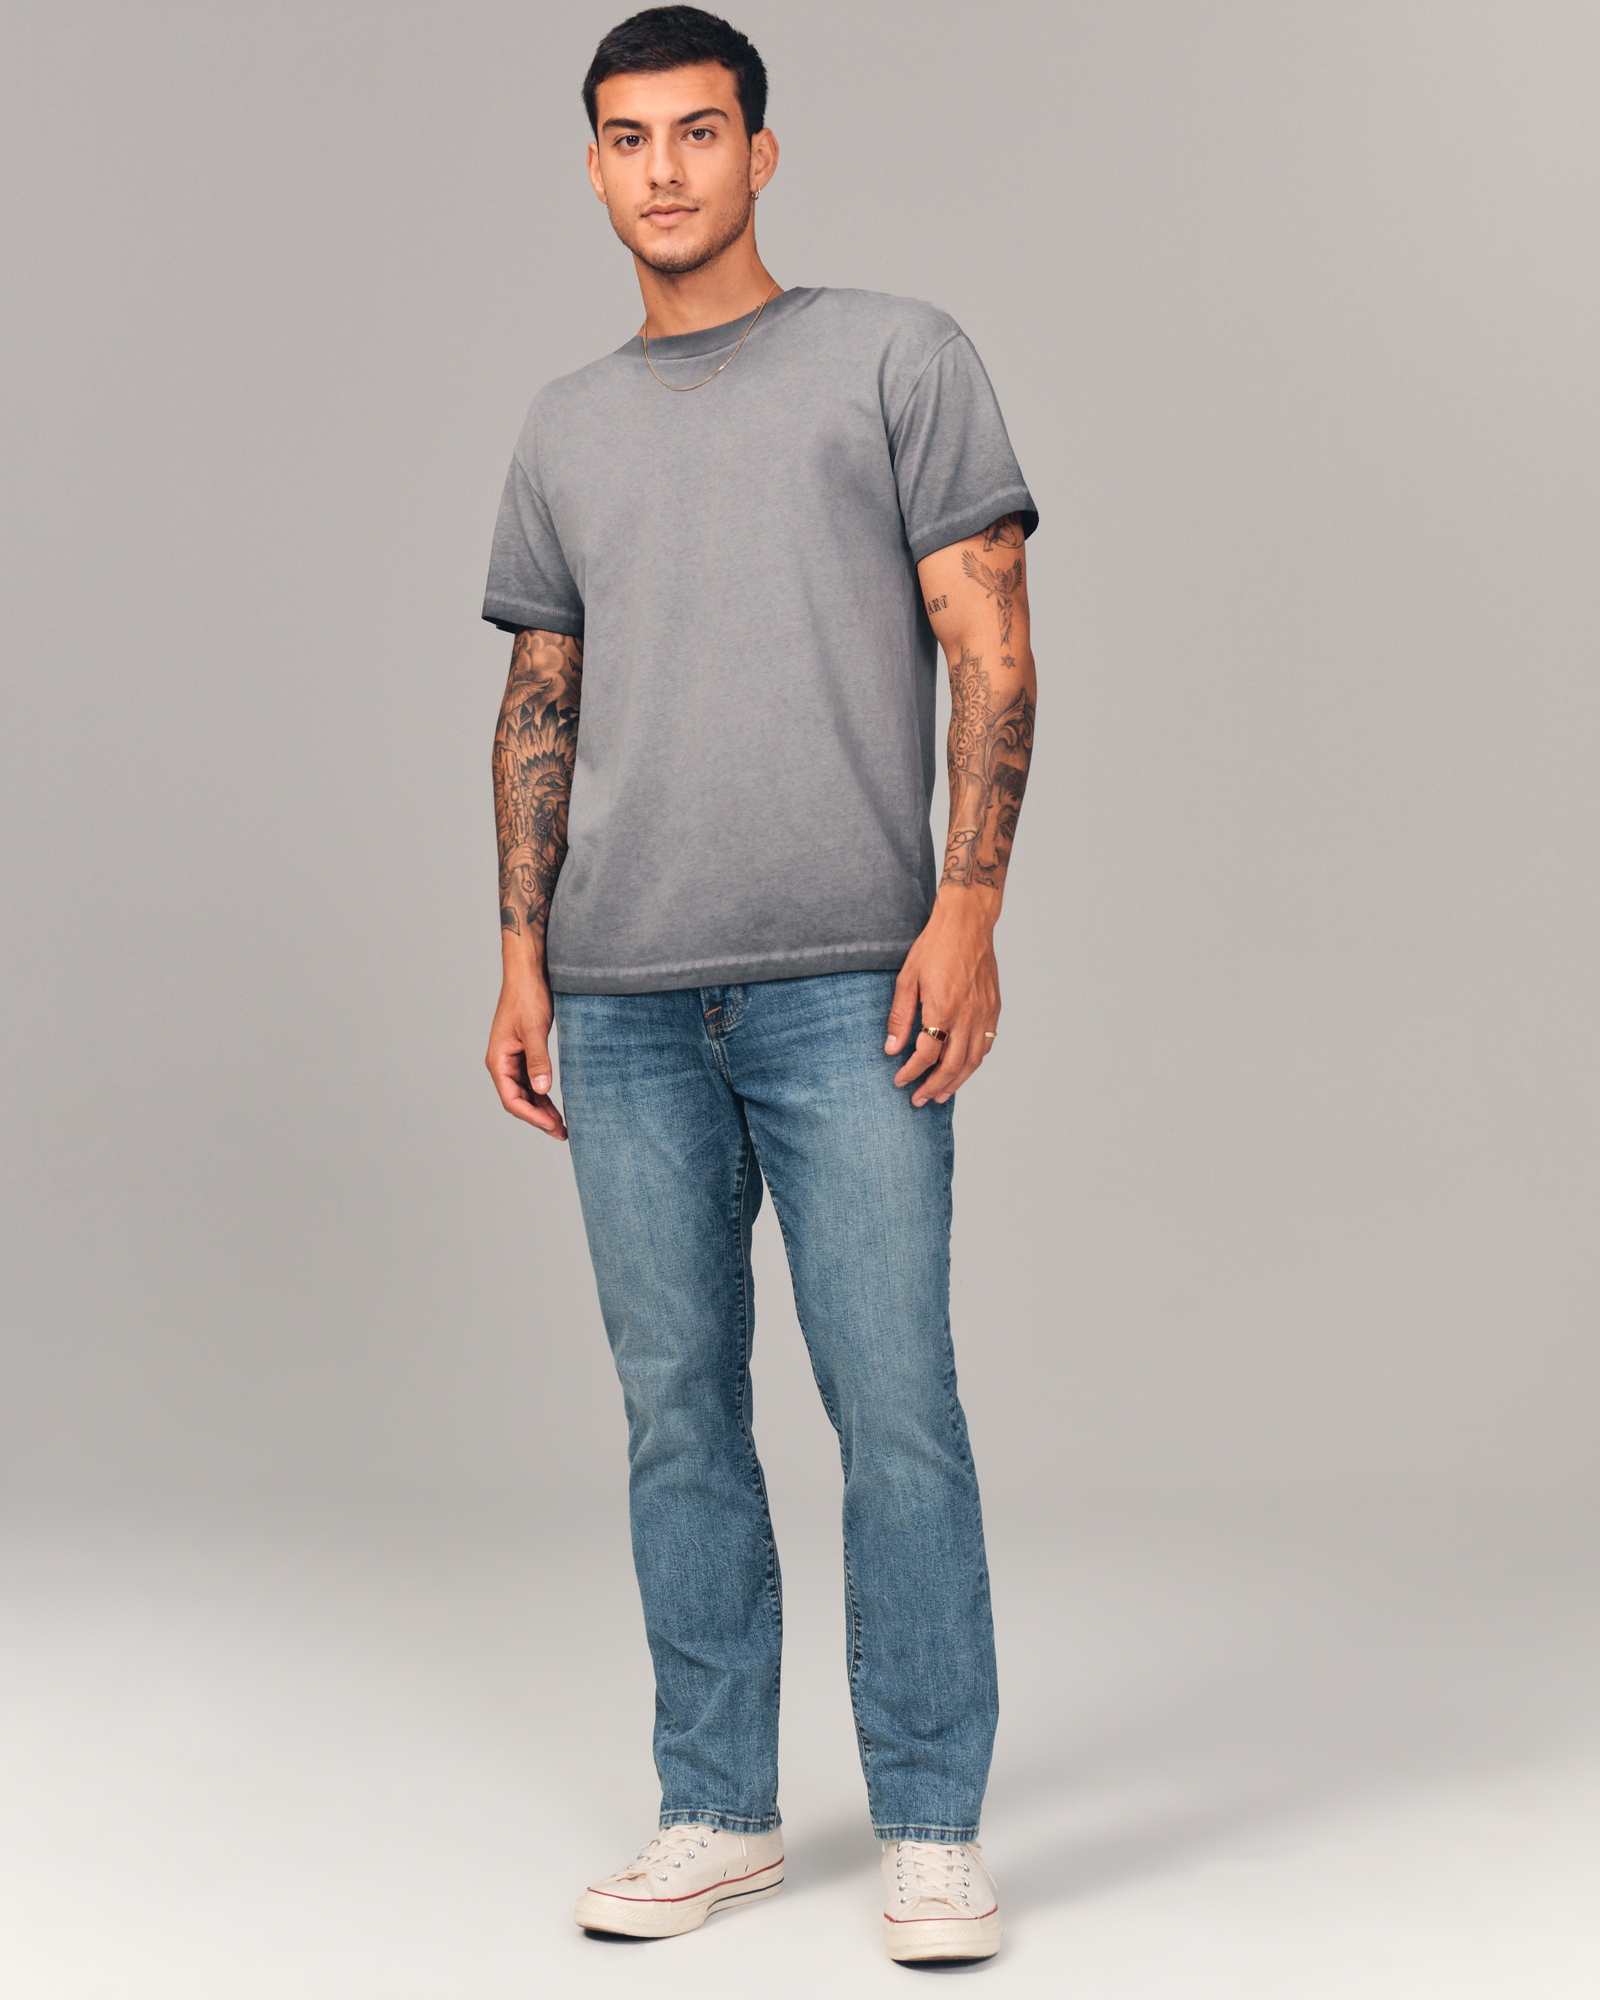 https://img.abercrombie.com/is/image/anf/KIC_131-2418-2416-276_model1.jpg?policy=product-extra-large